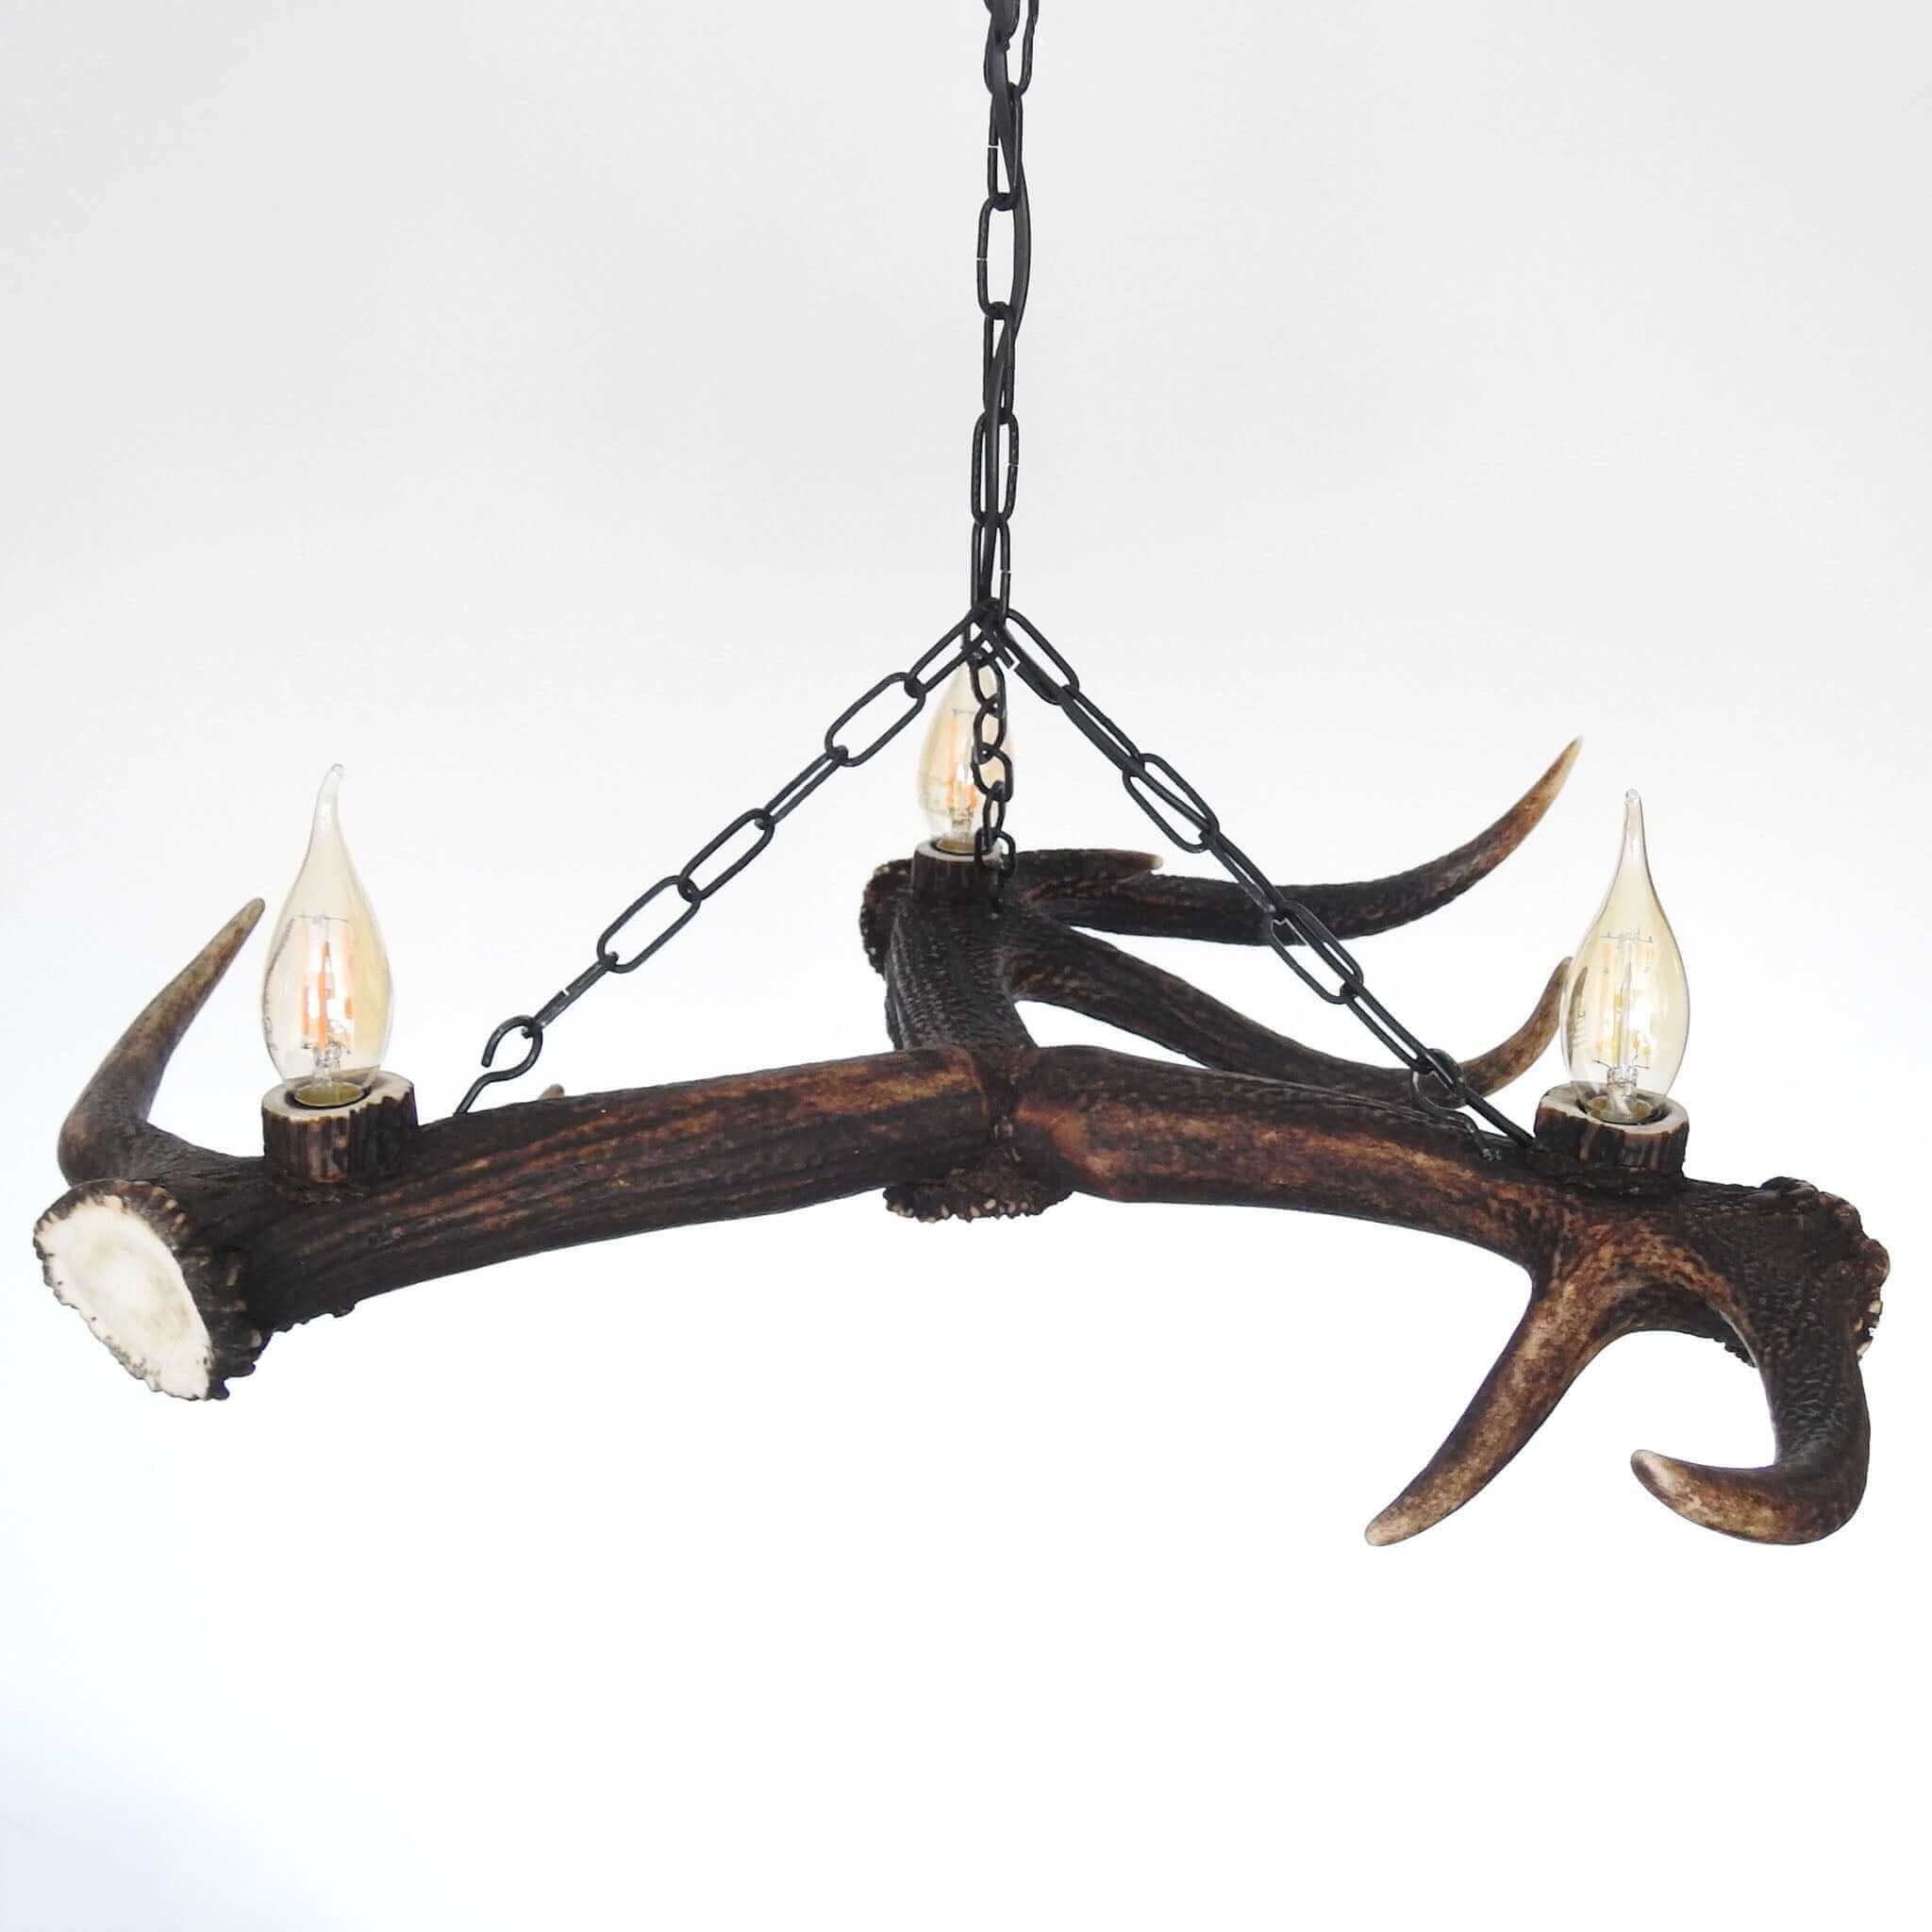 Low ceiling antler chandelier for farmhouse.